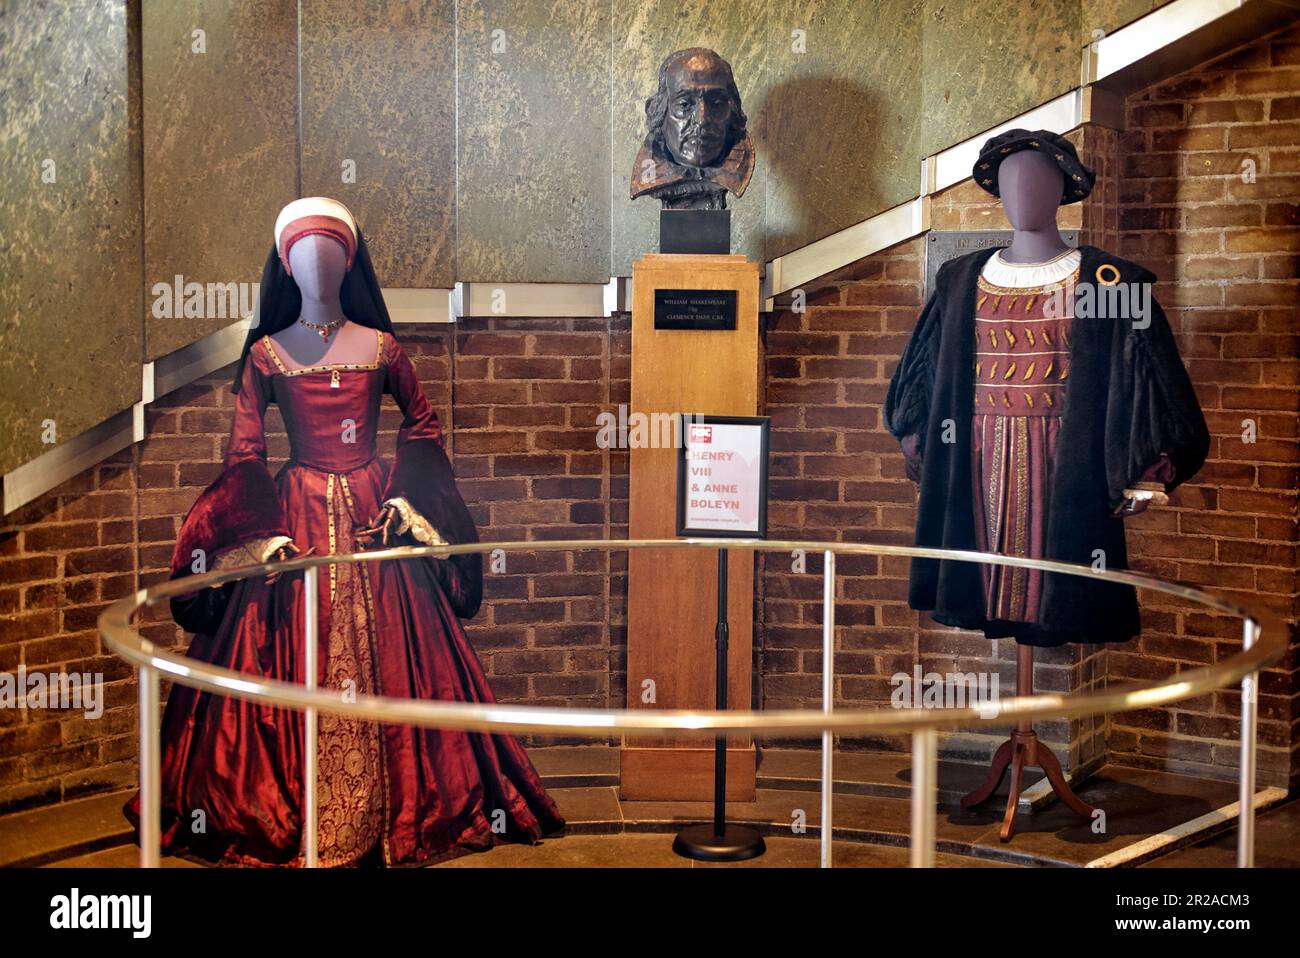 RSC Theatre interior with display of traditional Tudor costume worn by Henry V111 and Anne Boleyn. Royal Shakespeare Theatre, Stratford upon Avon, UK Stock Photo